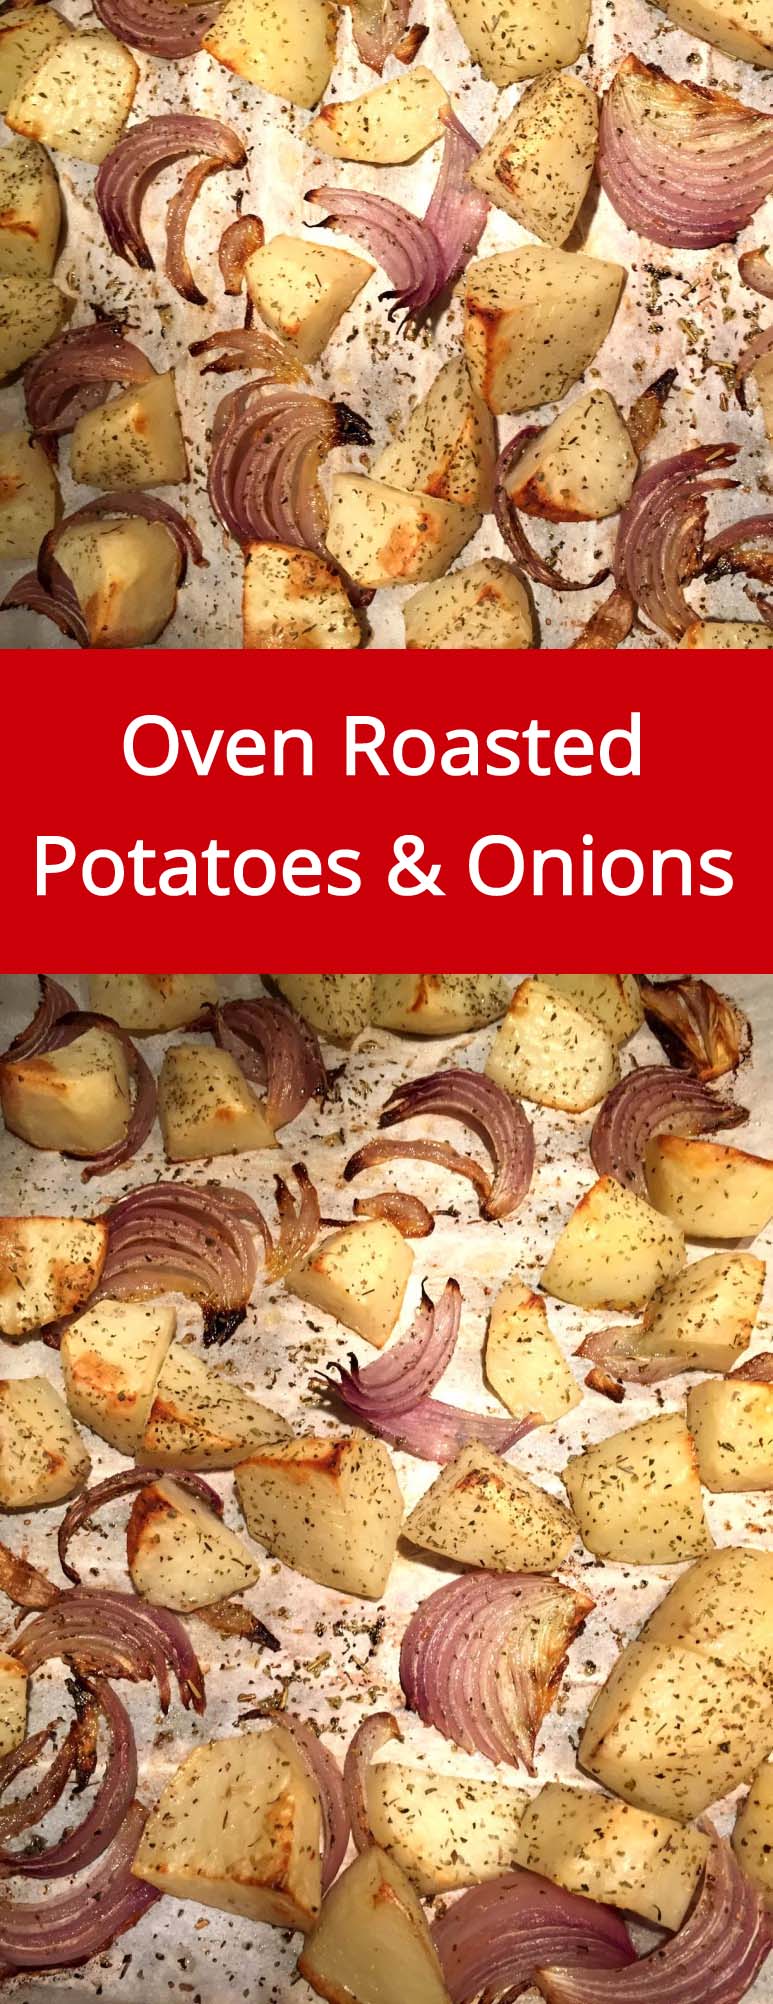 Oven Roasted Potatoes And Onions Recipe - super easy and yummy, the oven does all the work! | MelanieCooks.com